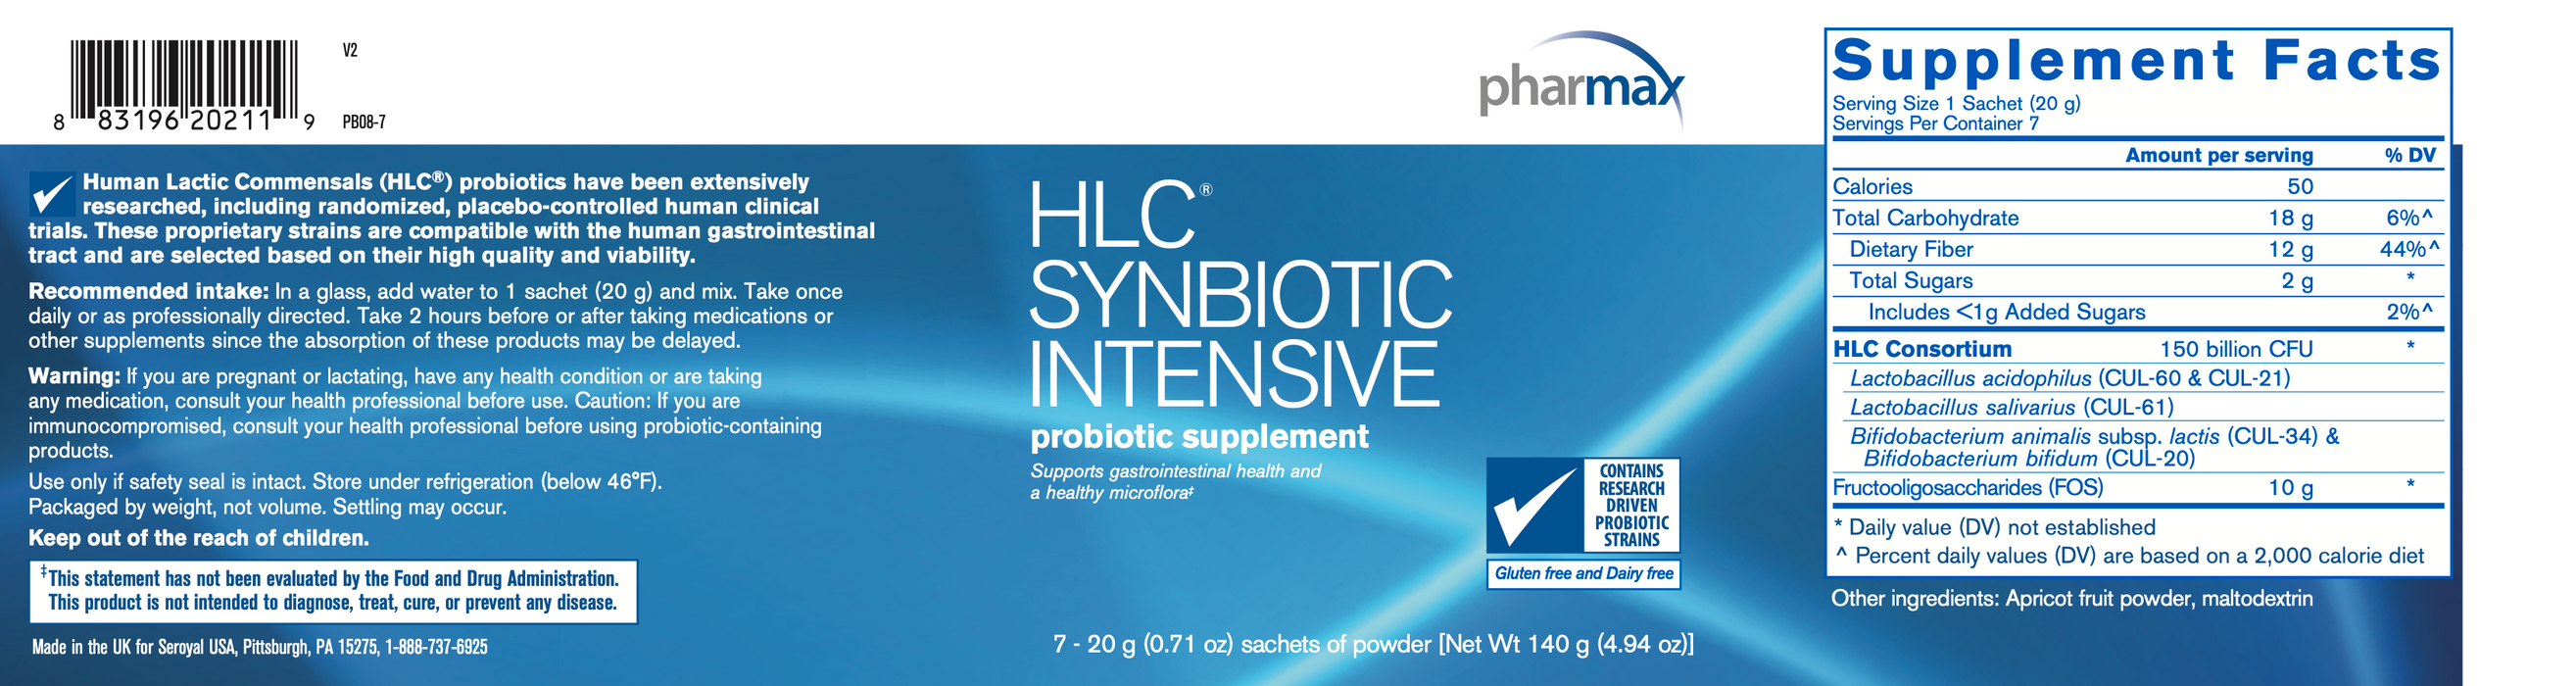 HLC Synbiotic Intensive (140 grams)-Vitamins & Supplements-Pharmax-Pine Street Clinic